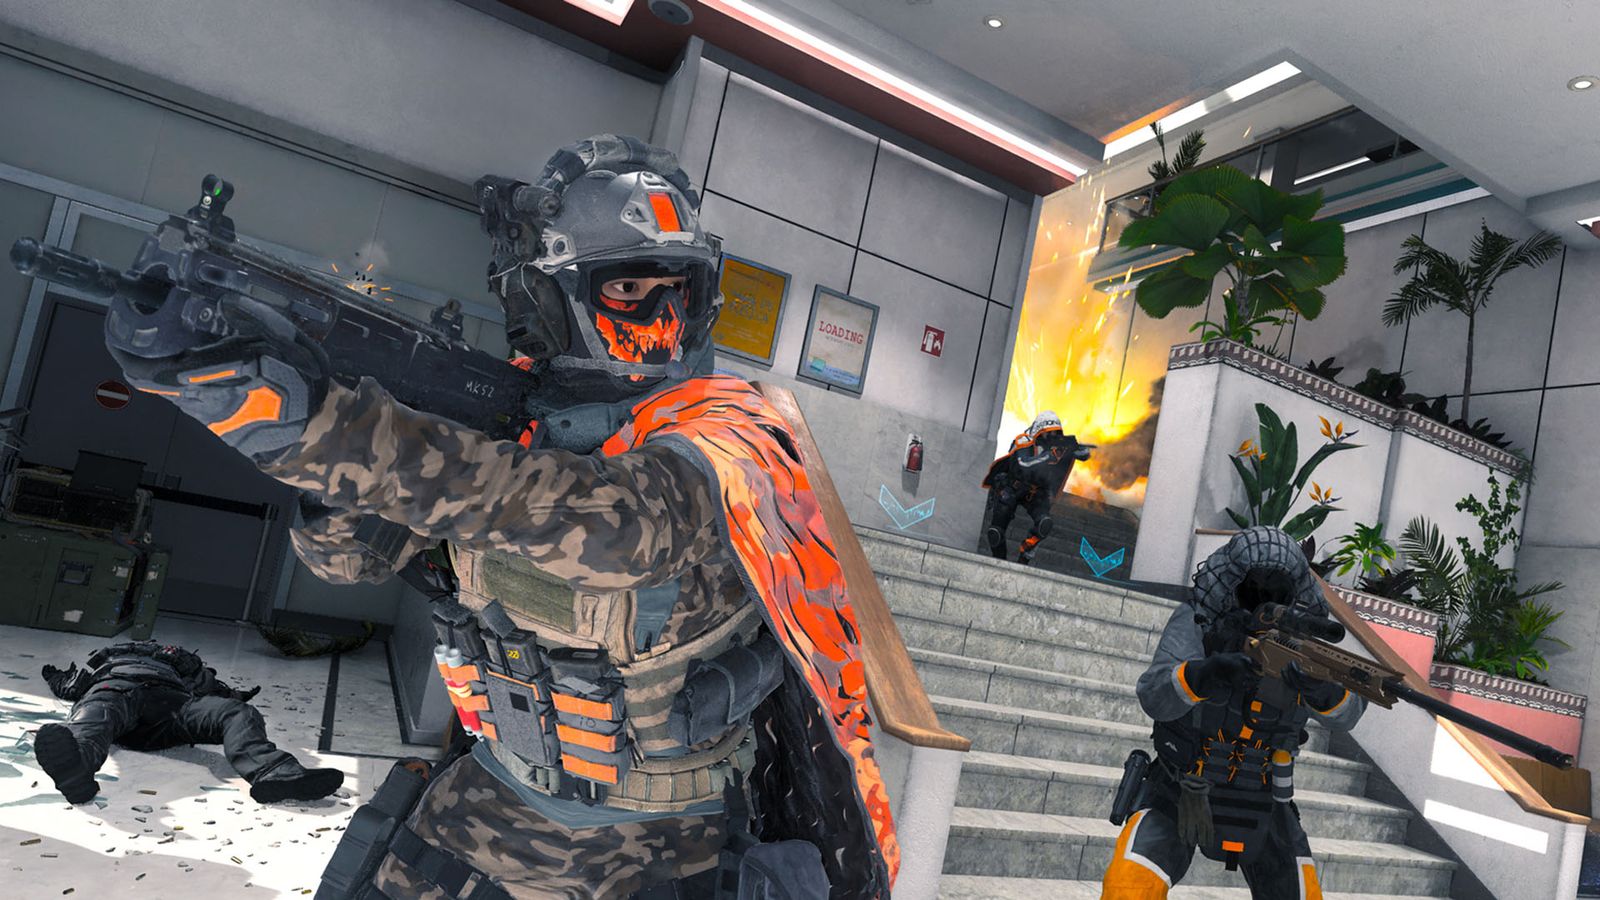 Modern Warfare 3 players guarding staircase while holding guns. An explosion is in the background